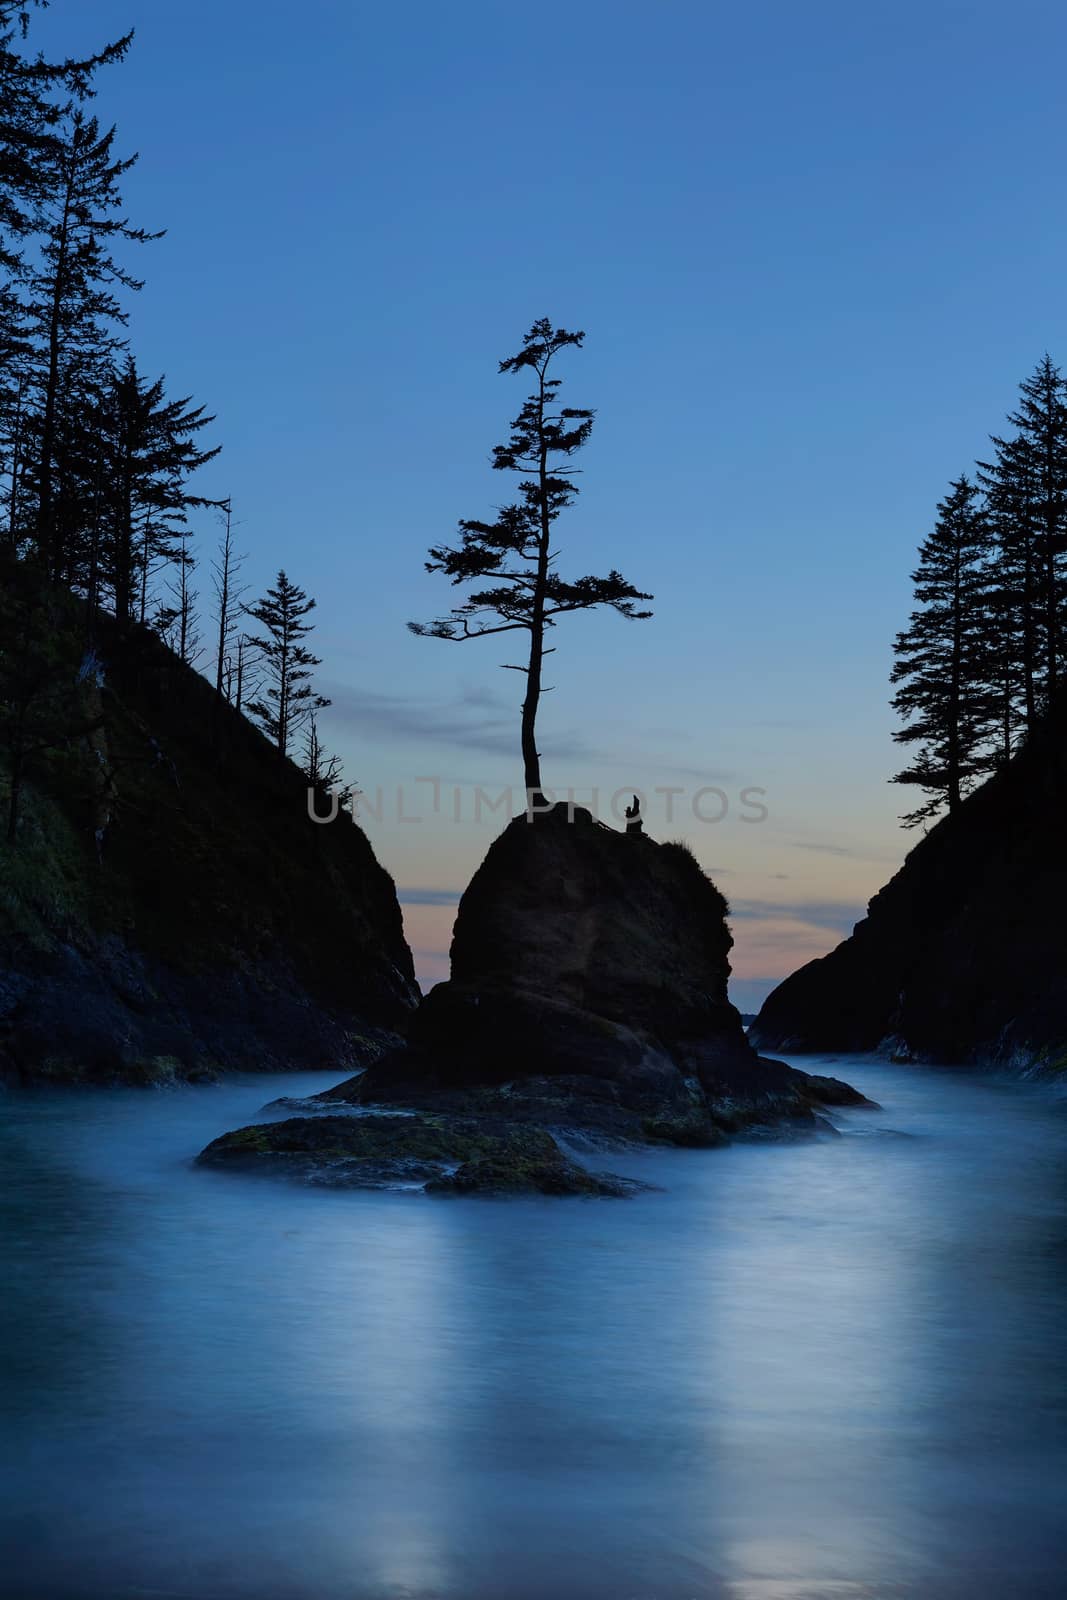 Deadman's Cove at Cape Disappointment at Twilight by Davidgn